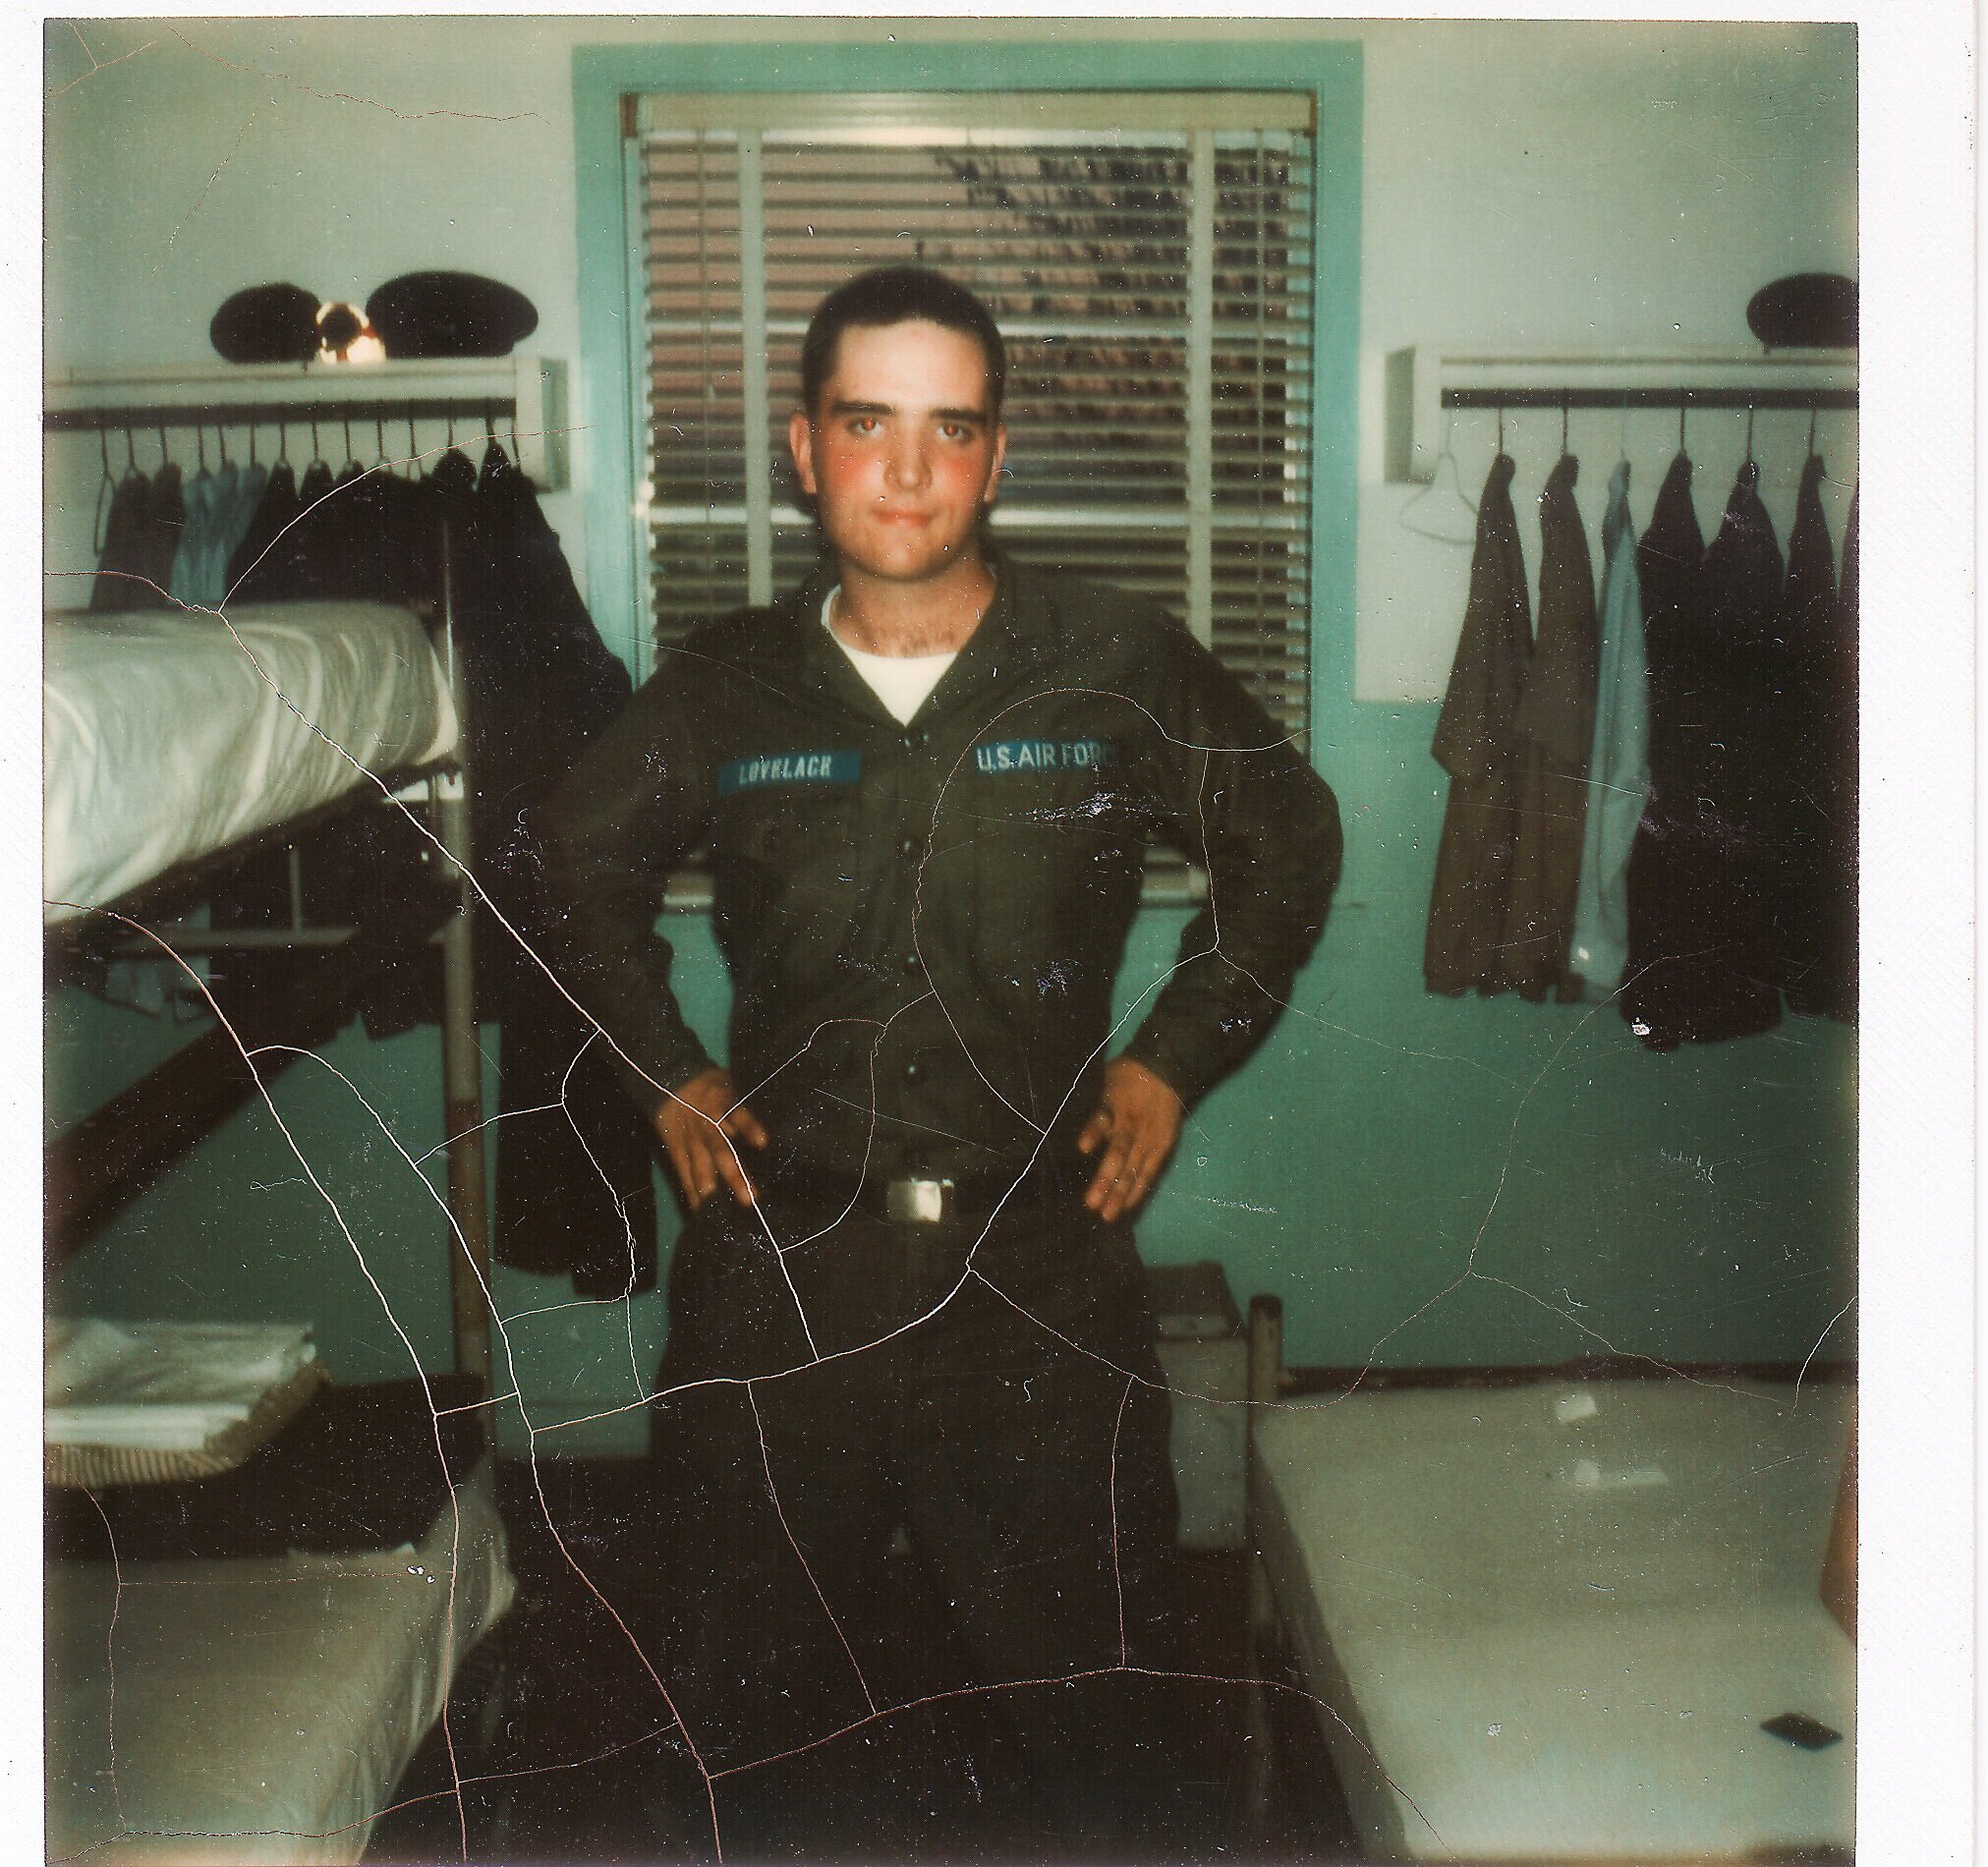  Terry awaiting assignment to Whiteman AFB in 1973. 